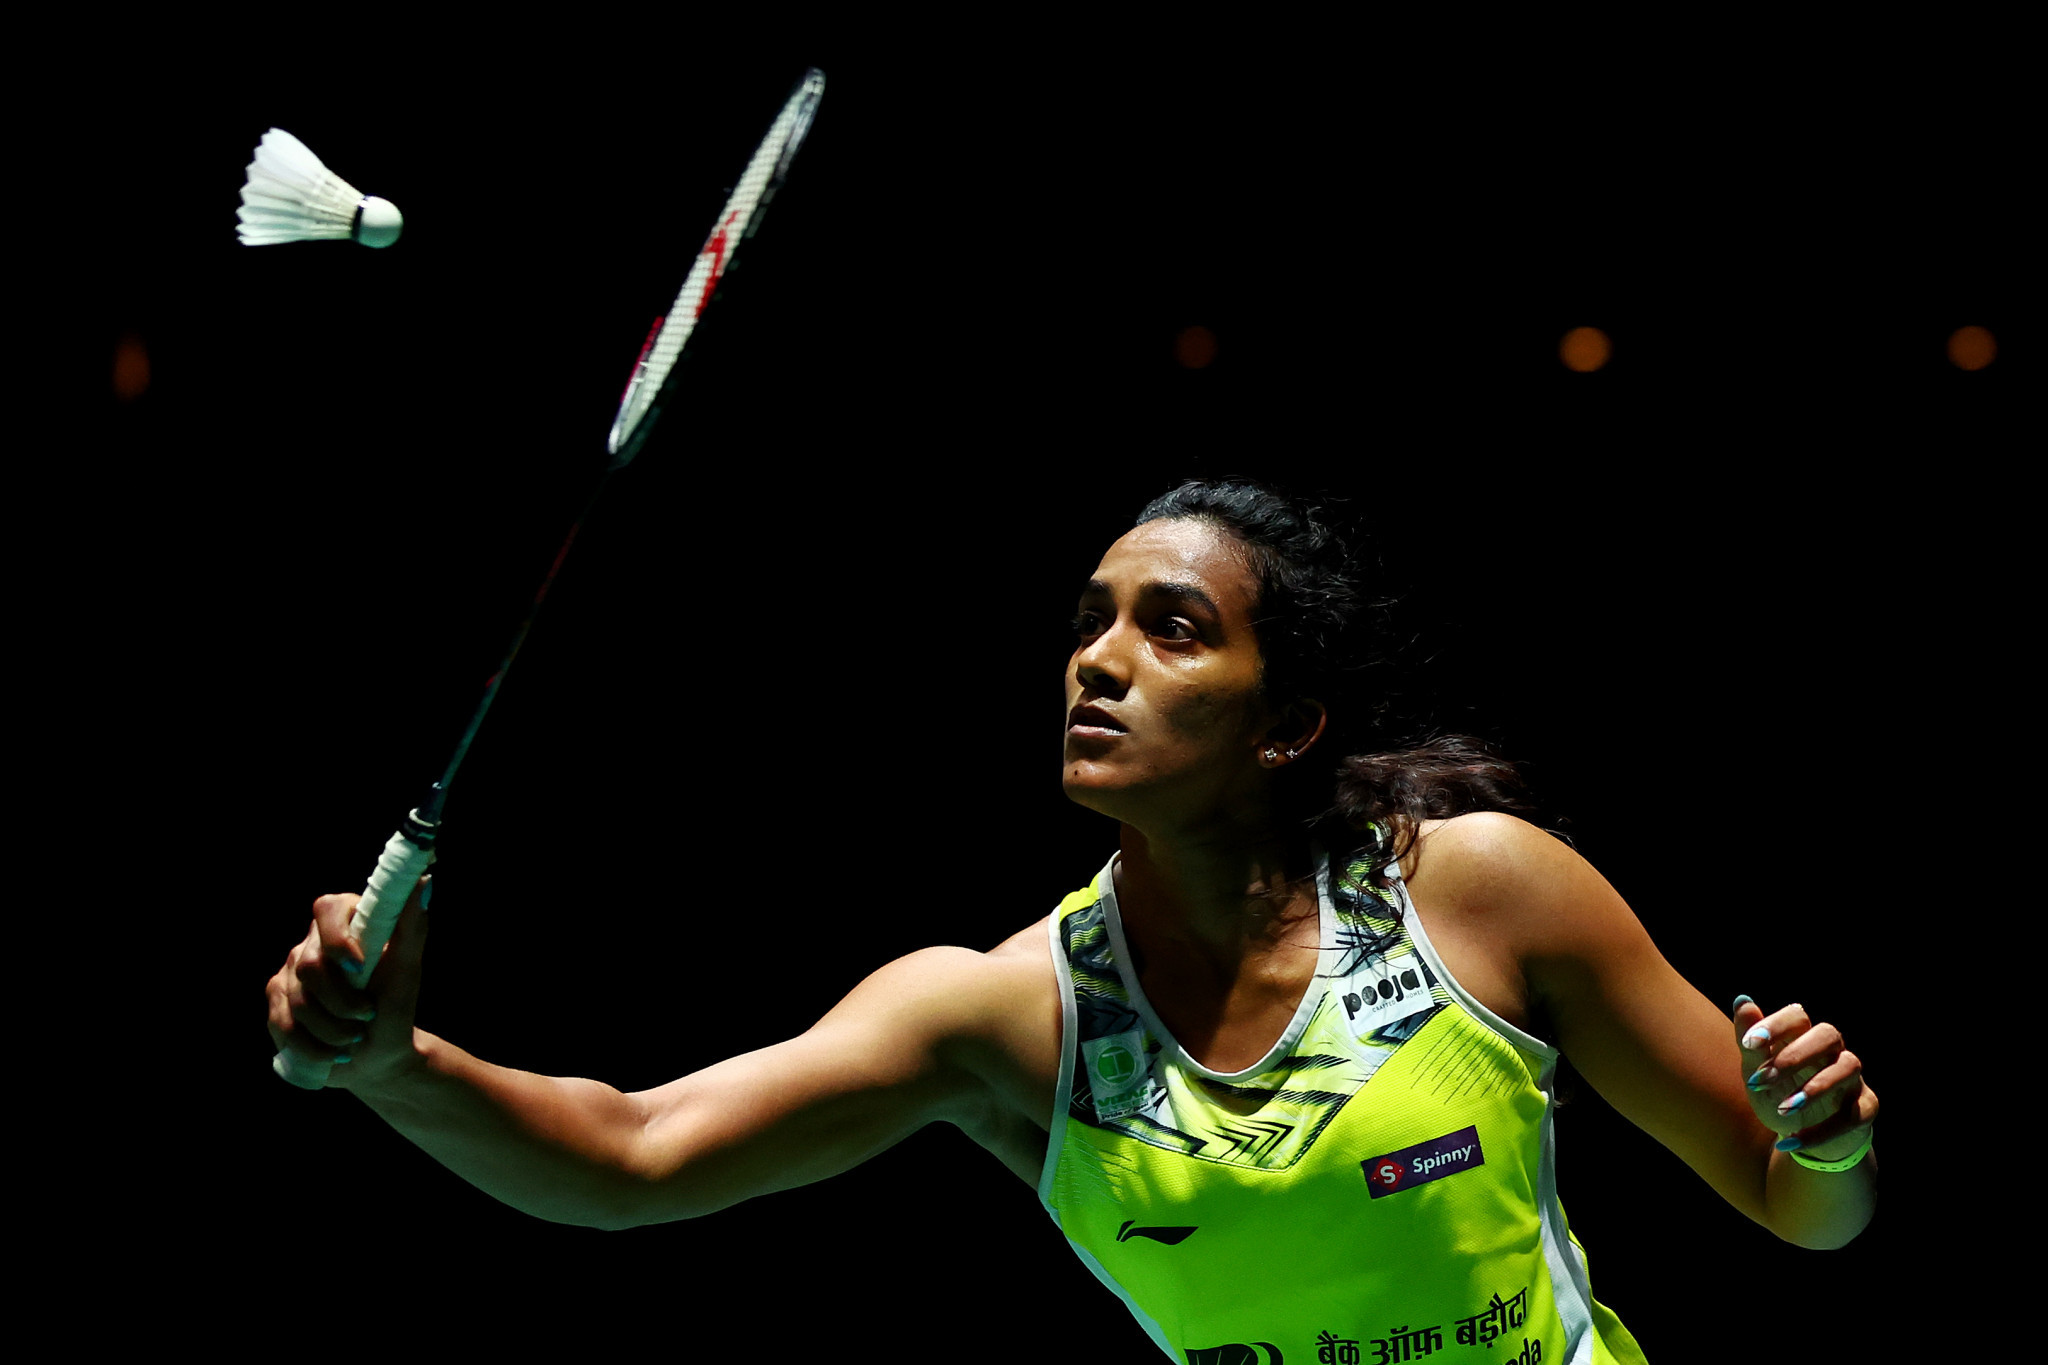 PV Sindhu will carry Indian hopes at the badminton in Birmingham ©Getty Images